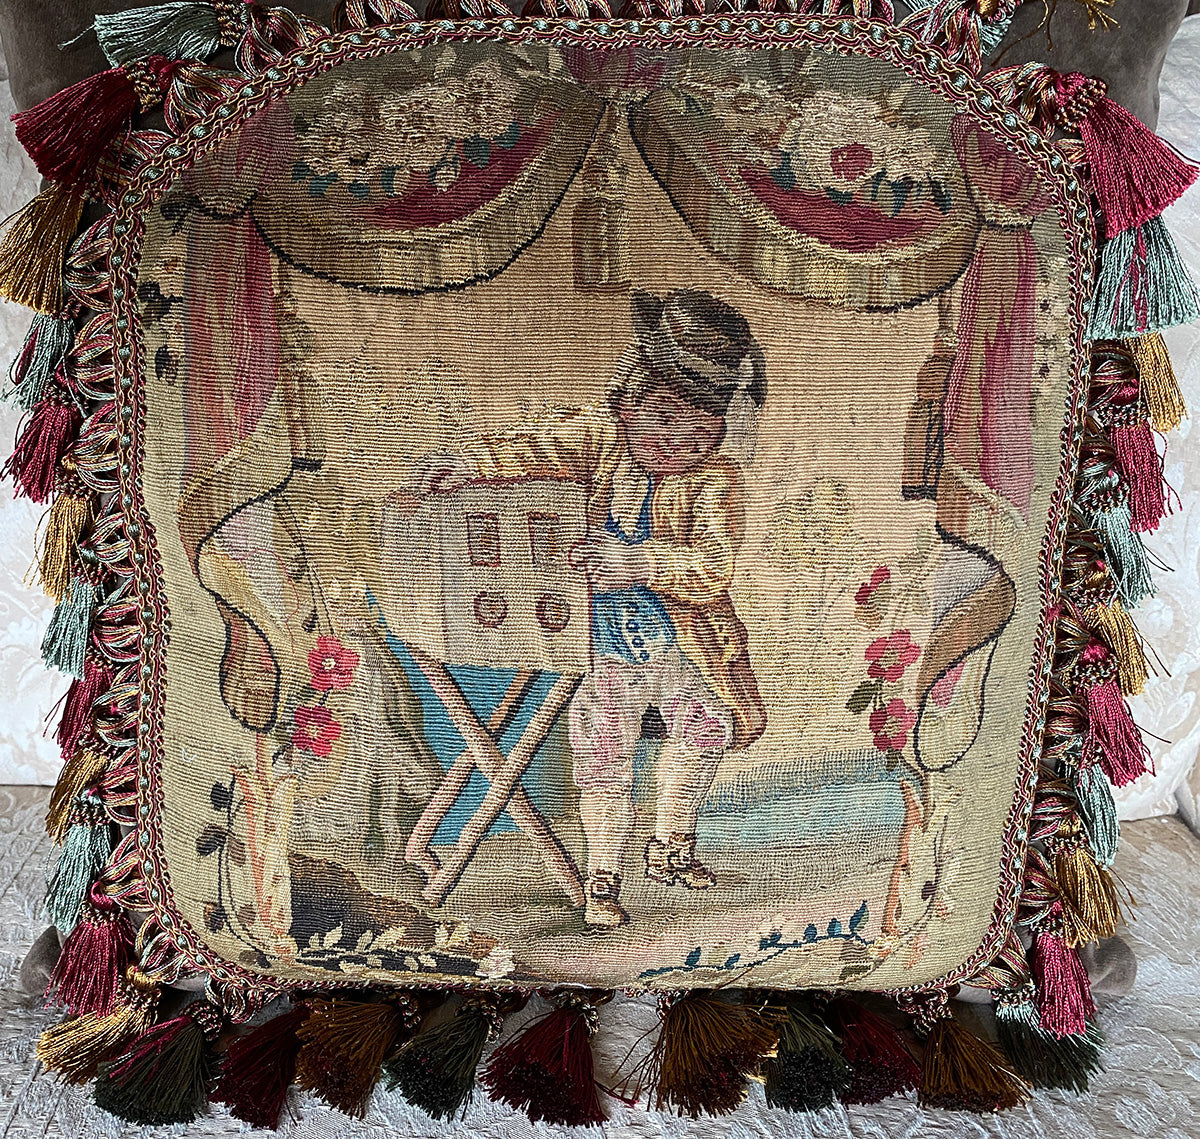 Superb 20" Square Throw Pillow with 18th Century Antique French Aubusson Tapestry and 4" Fringe Passementerie